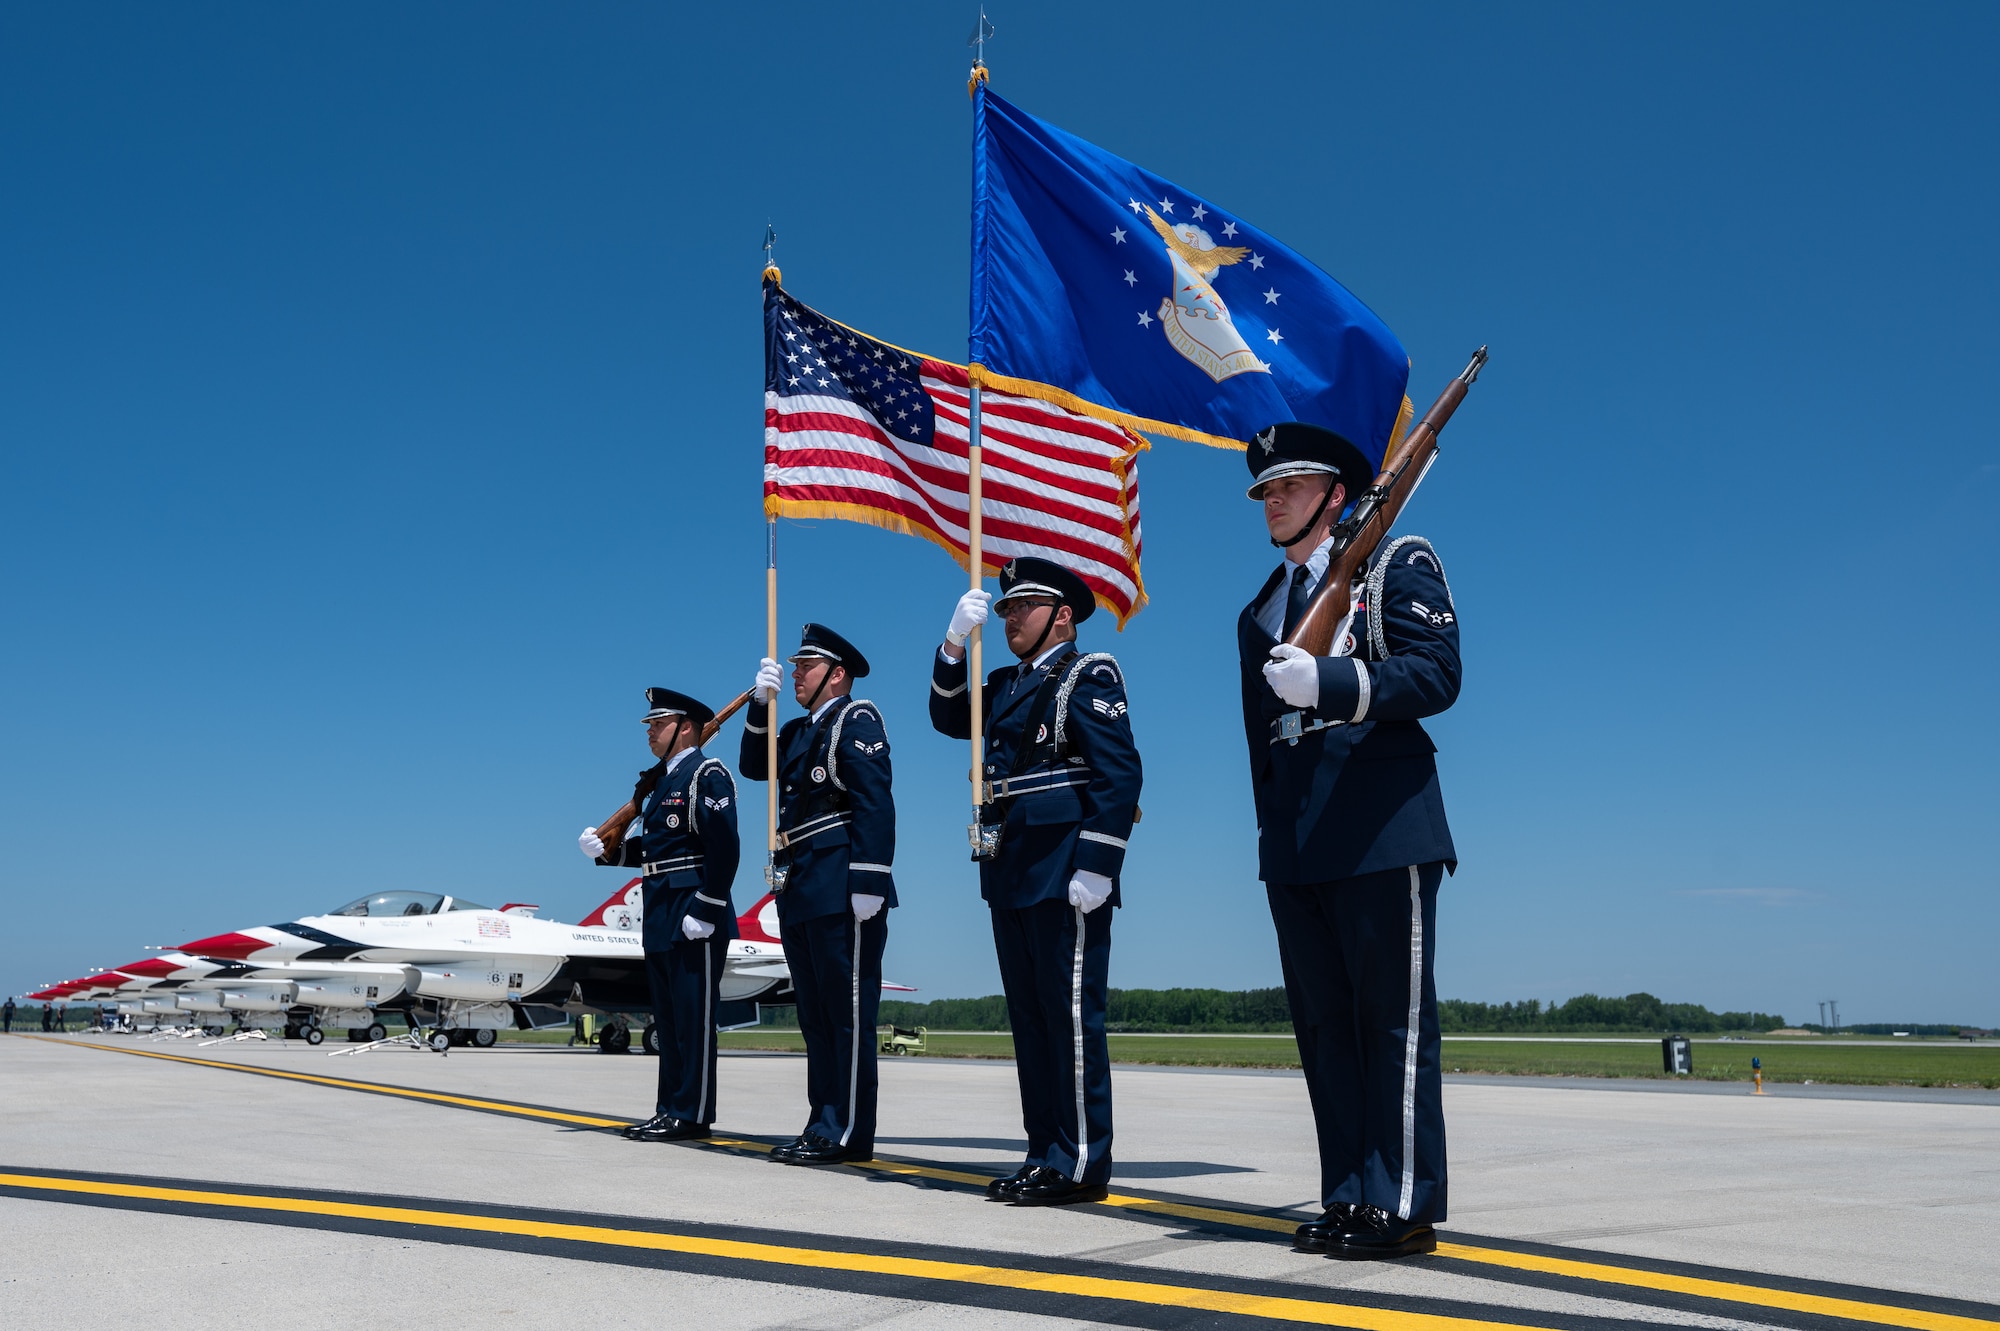 Members of the Dover Air Force Base Honor Guard present the colors during the opening ceremony of the 2022 Thunder Over Dover Airshow, May 22, 2022, at Dover AFB, Delaware. The base opened its gates to more than 75,000 spectators for a free, two-day event to showcase the Air Force and the base’s mission of providing rapid global airlift every day of the year. (U.S. Air Force photo by Mauricio Campino)